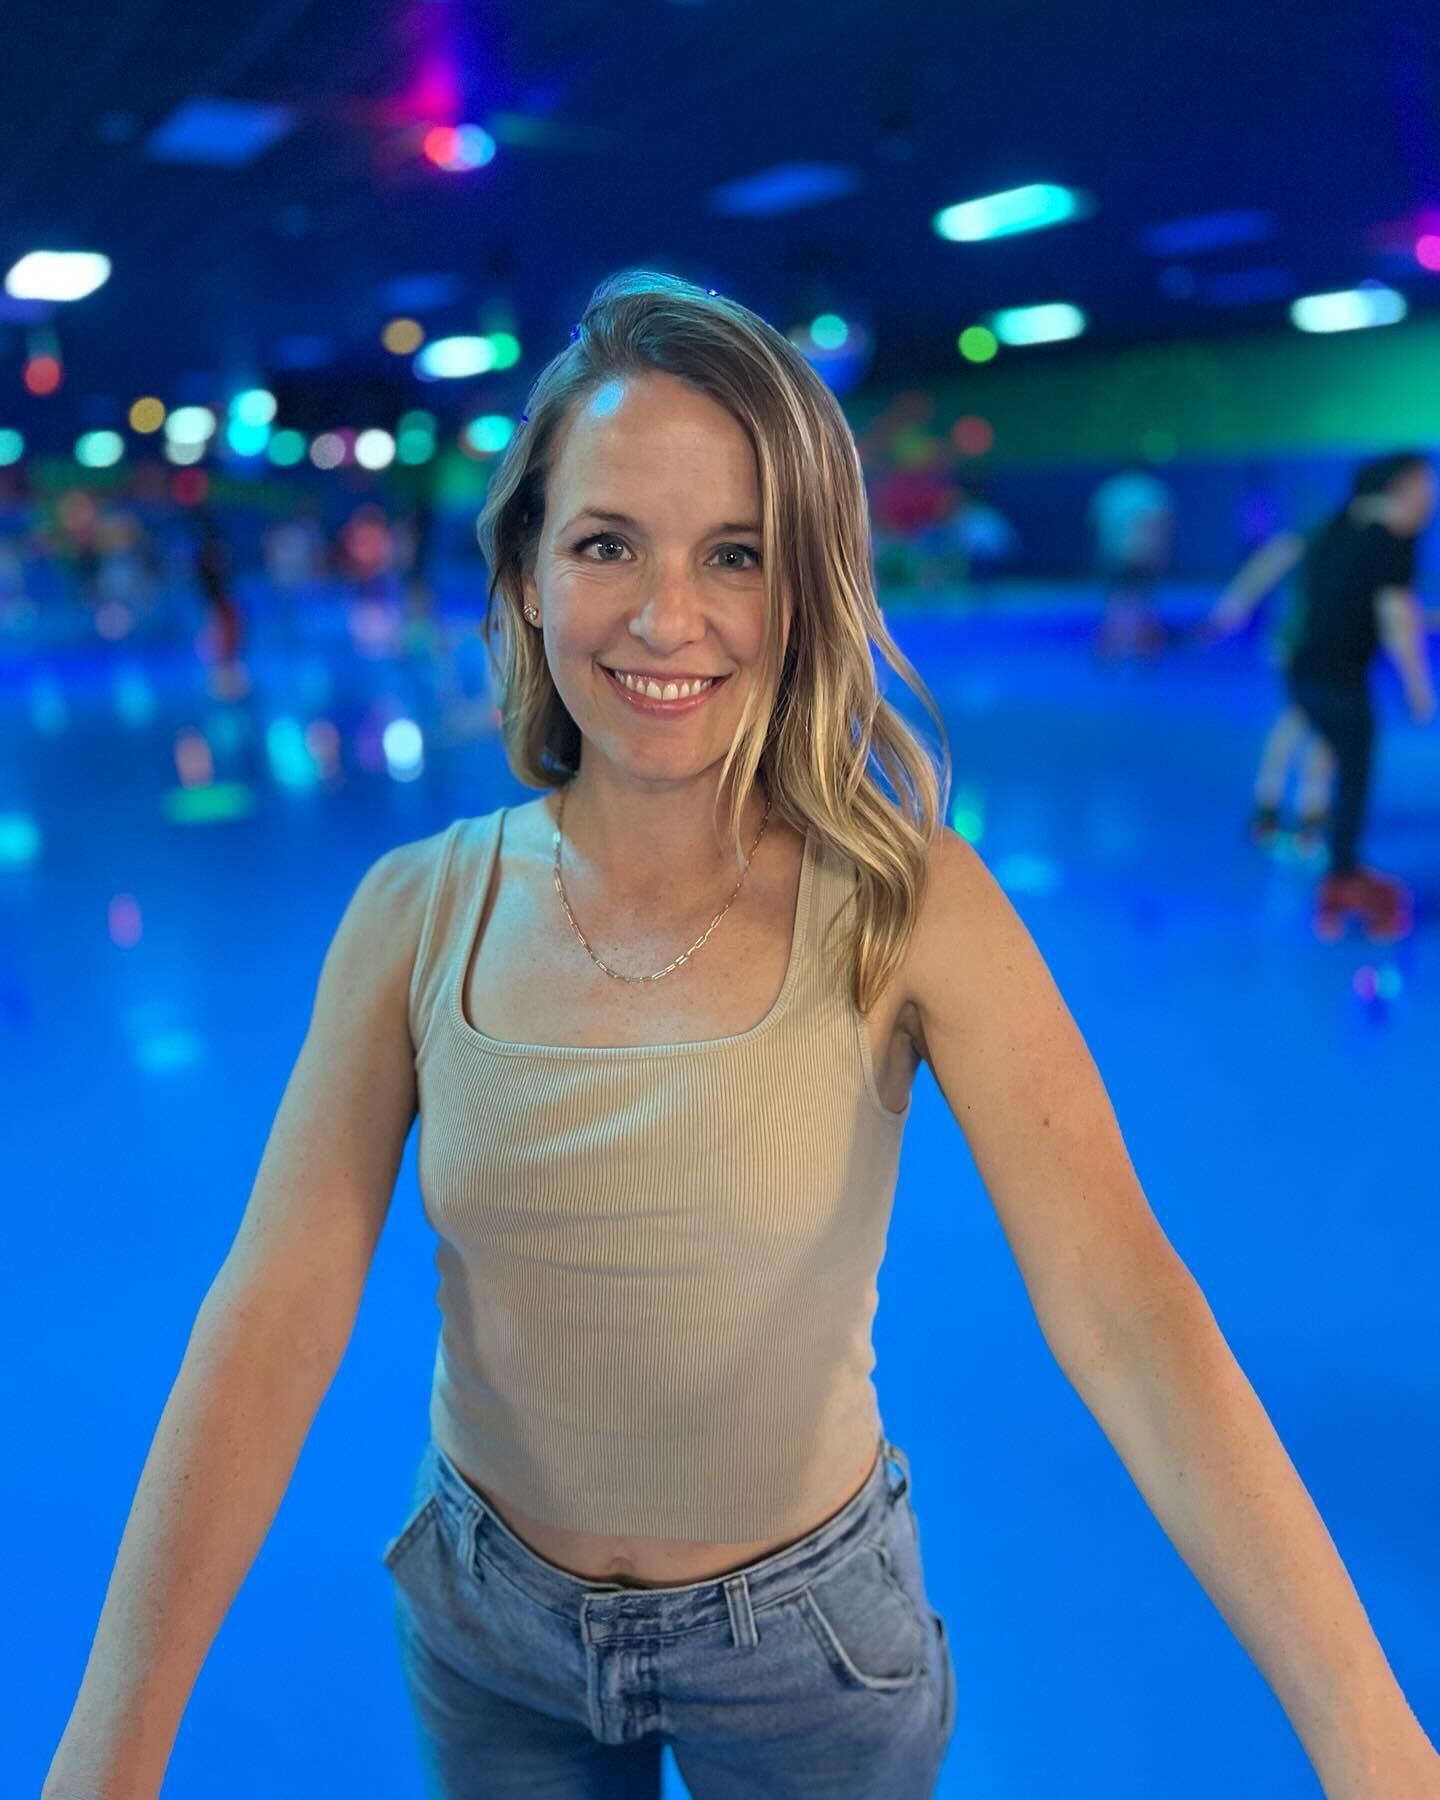 Went to fka Skate Country on Thursday night with my boys for their school&rsquo;s fundraiser.

Serendipitously, in my podcast episode that dropped Friday, I shared a story that took place in 5th grade at that same skating rink, when I chose not to se